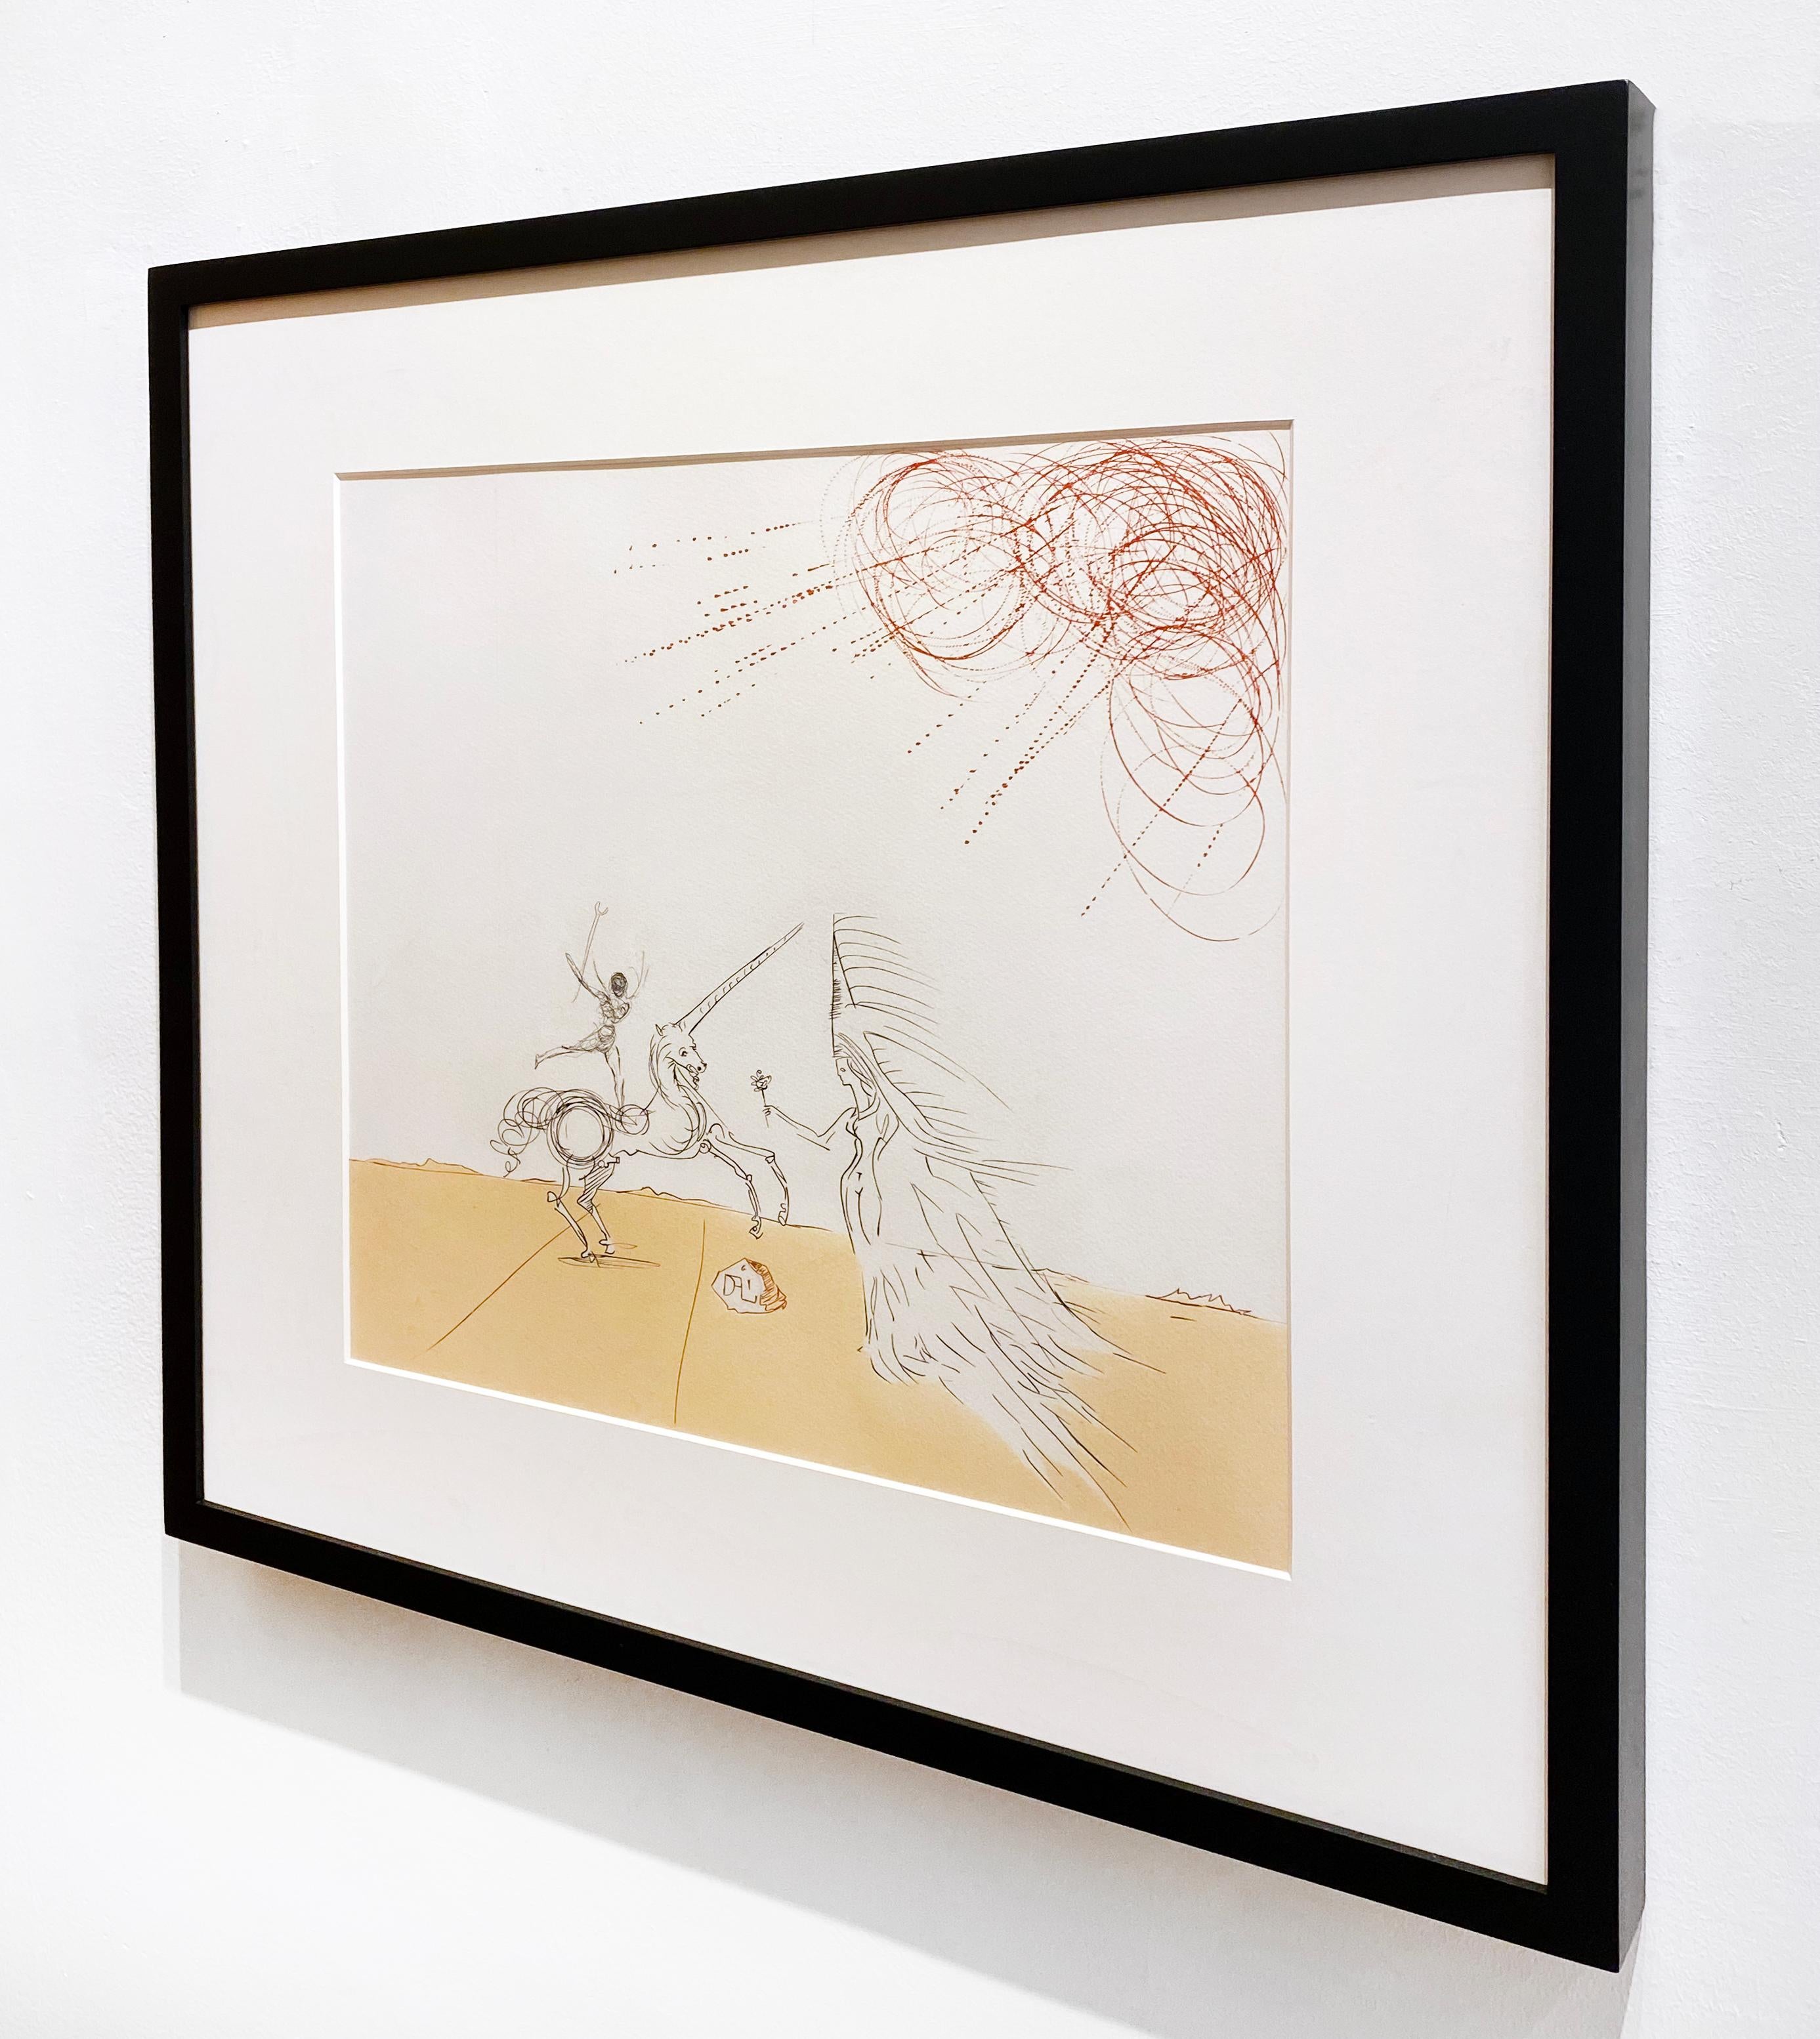 Artist:  Dali, Salvador
Title:  Desert Fabeleux from Dahlia
Series:  Neuf Paysages
Date:  1980
Medium:  Aquatint and photogravures with black drypoint remarques
Framed Dimensions:  22.5